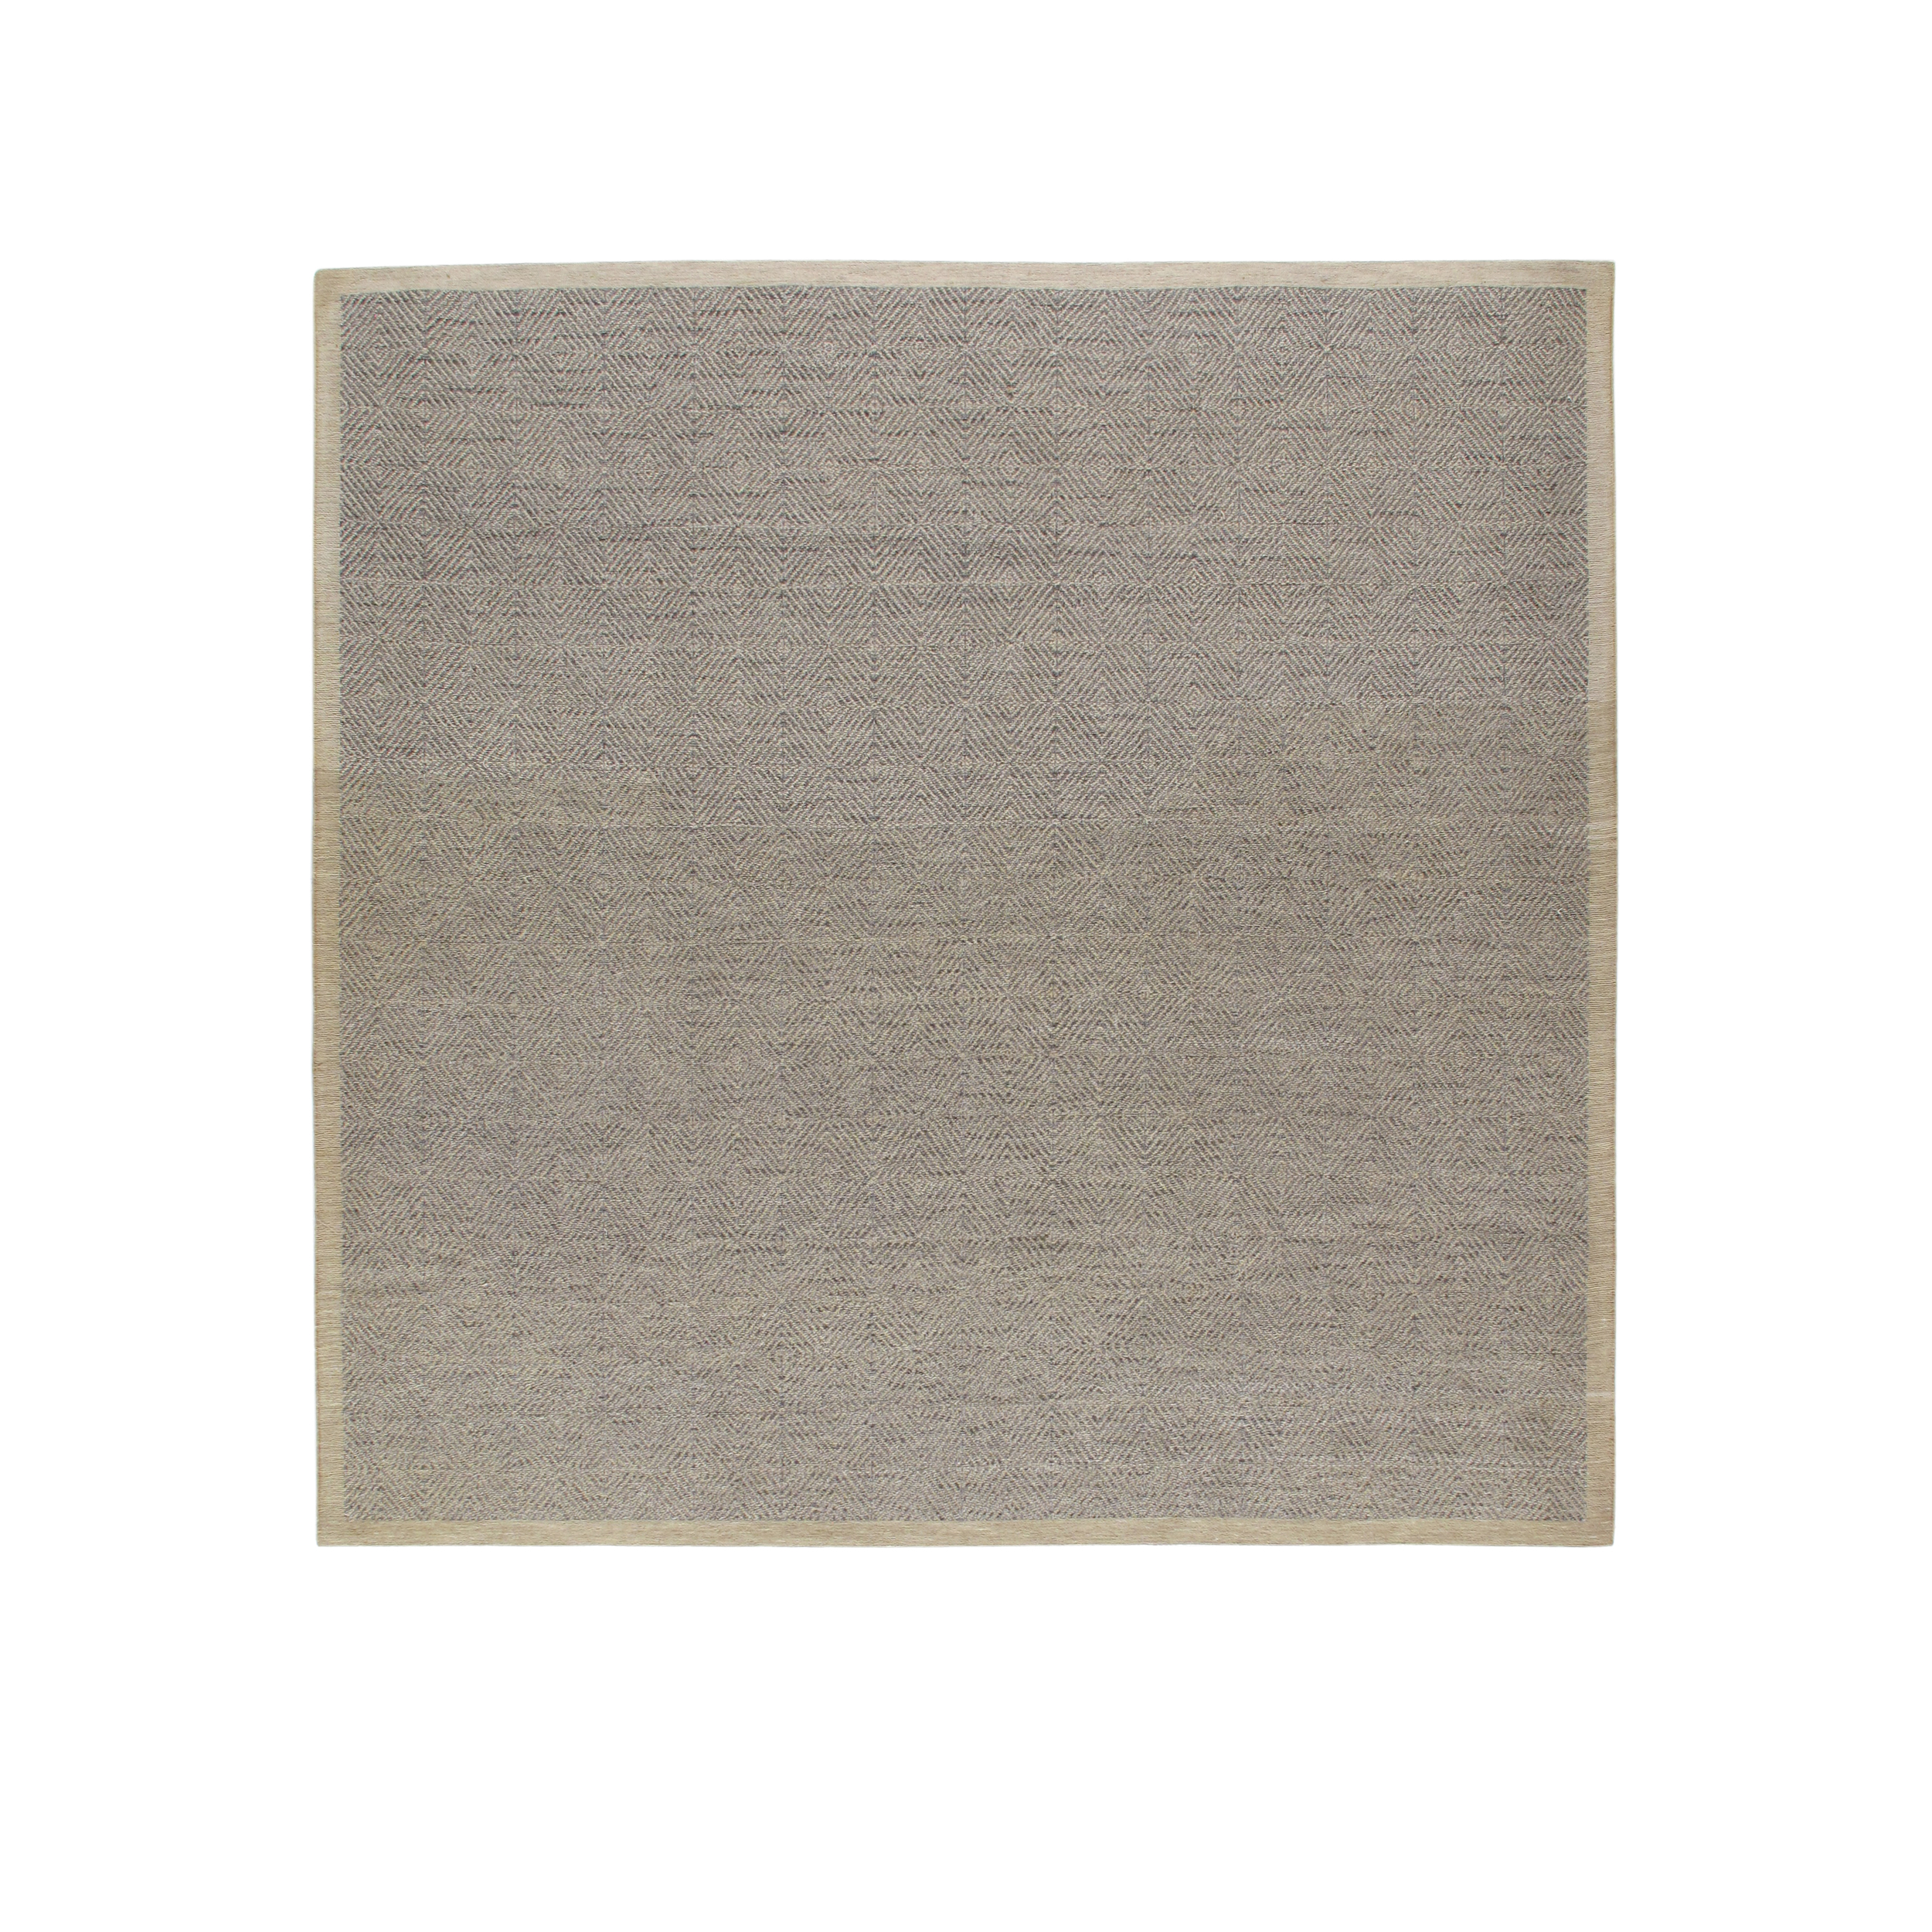 Diamond rug is a modern flatweave crafted from the finest handspun wool. 